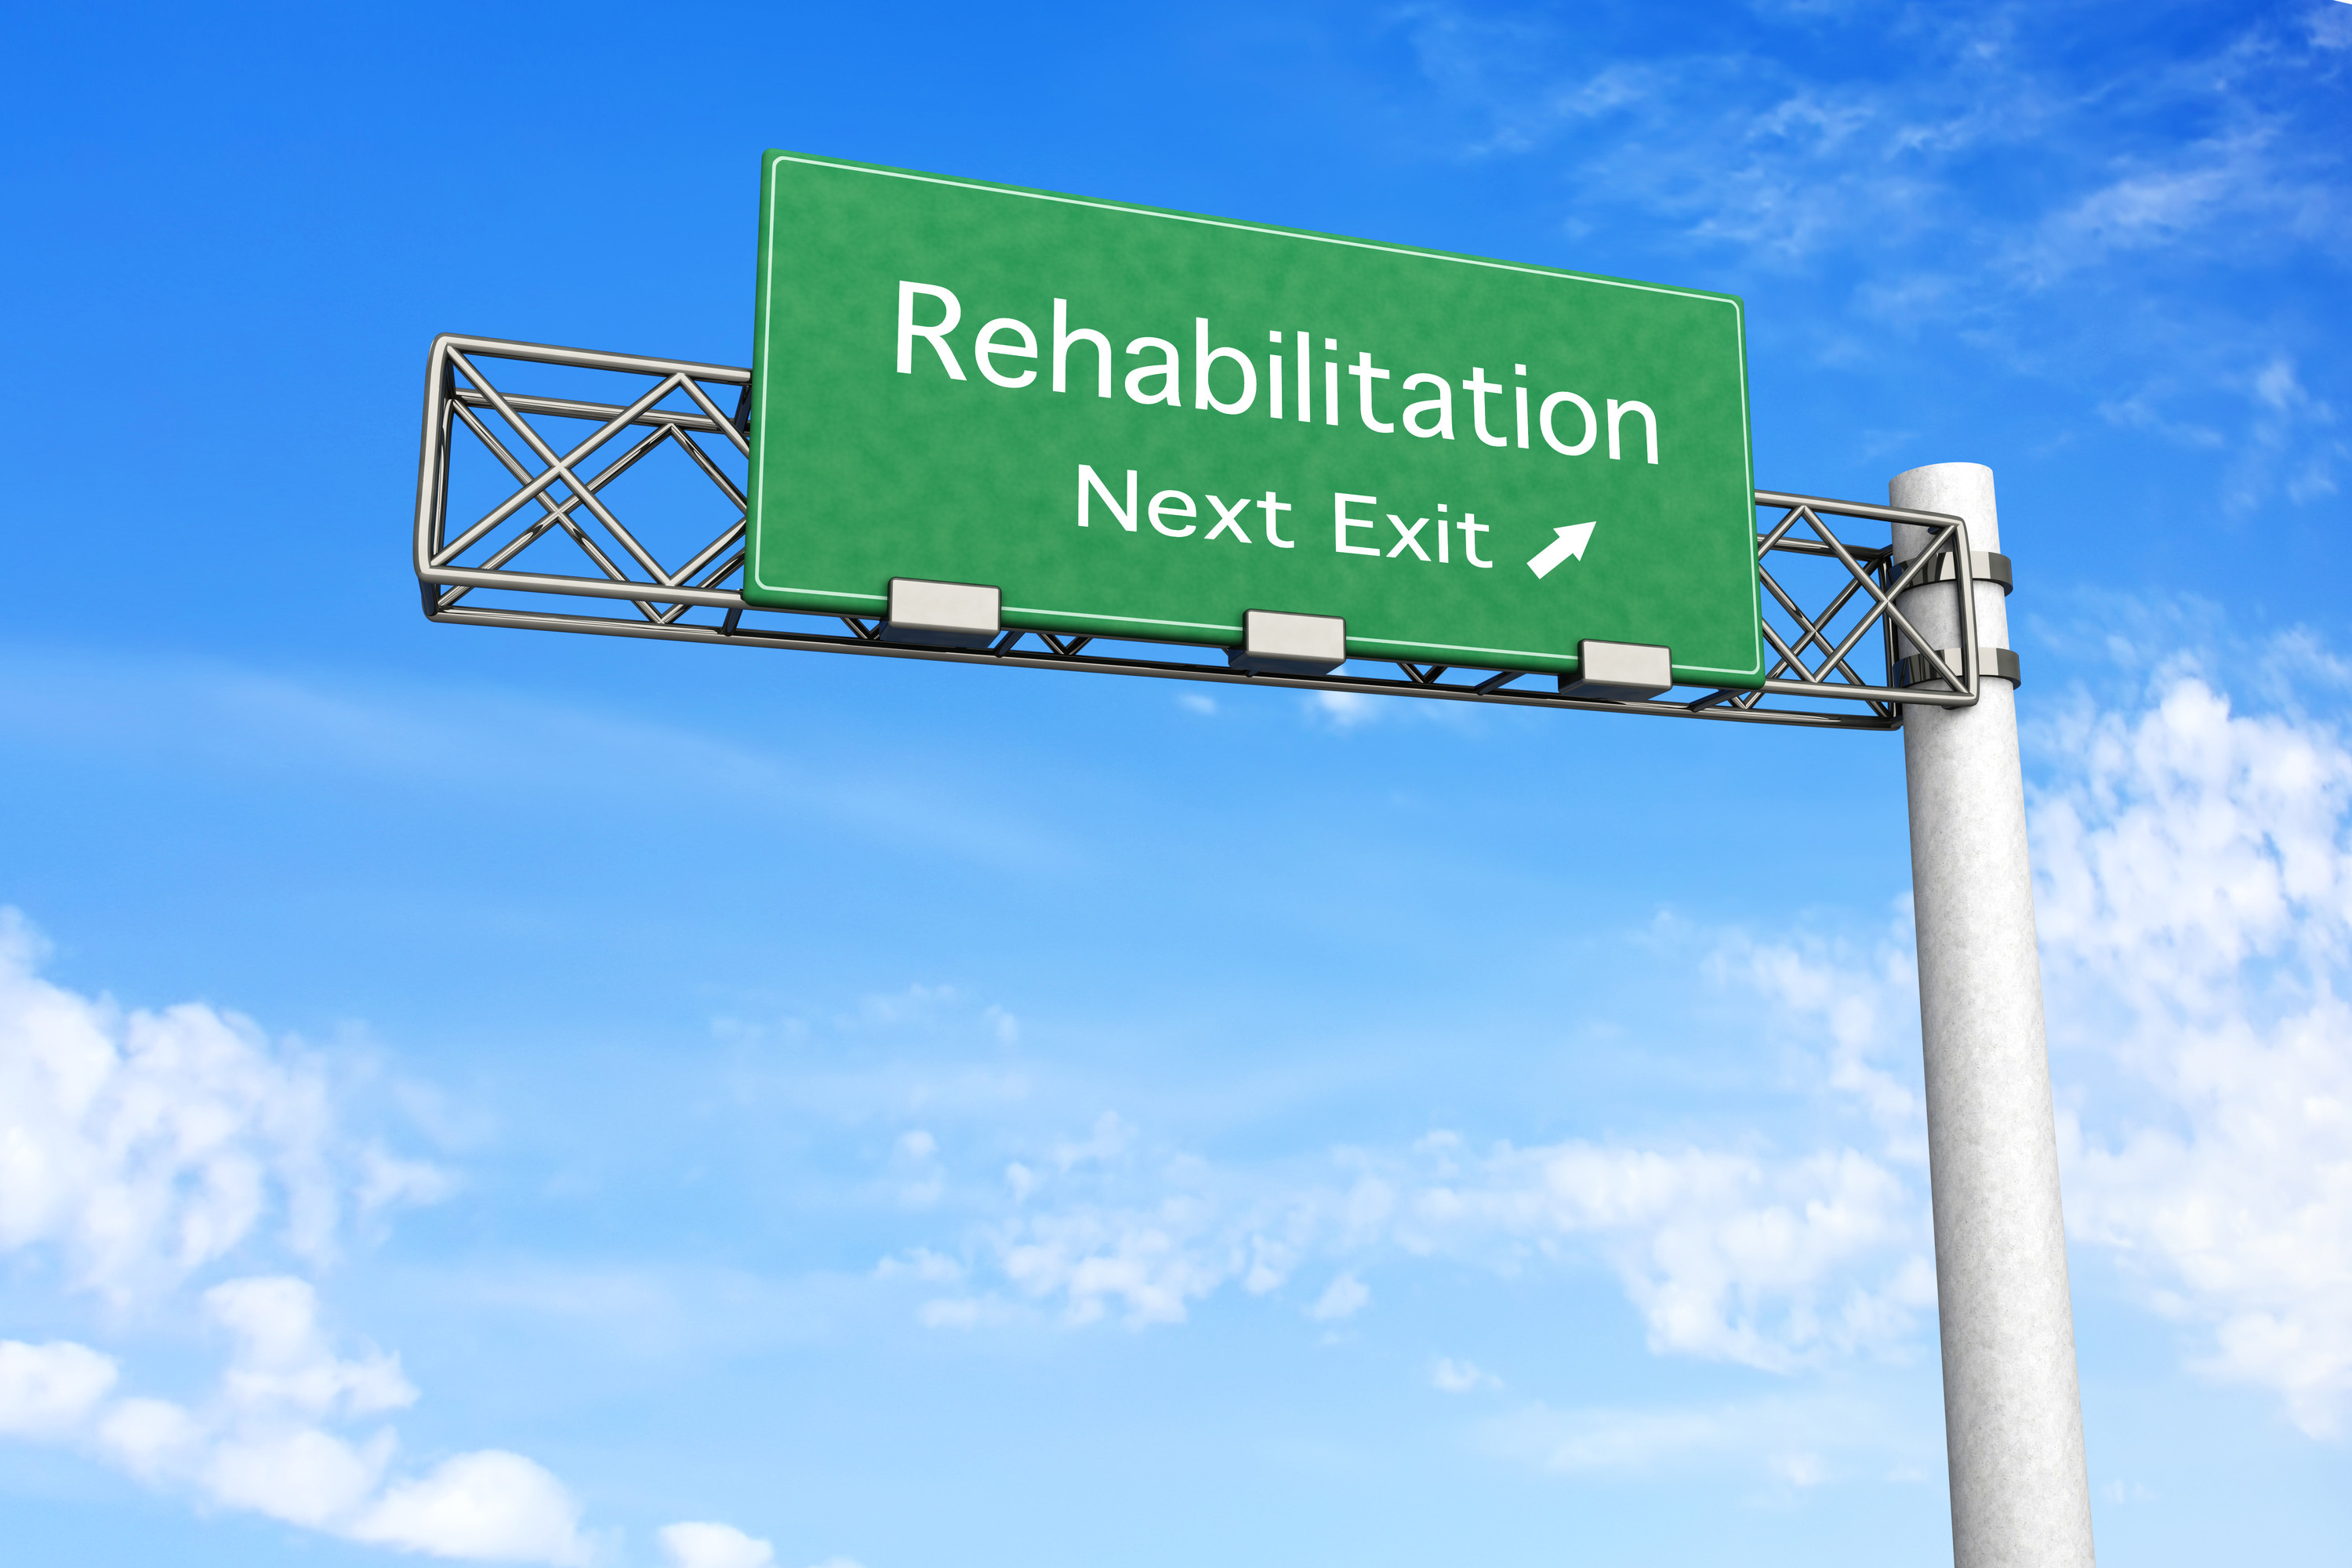 State Funded Drug Rehabs in Ohio